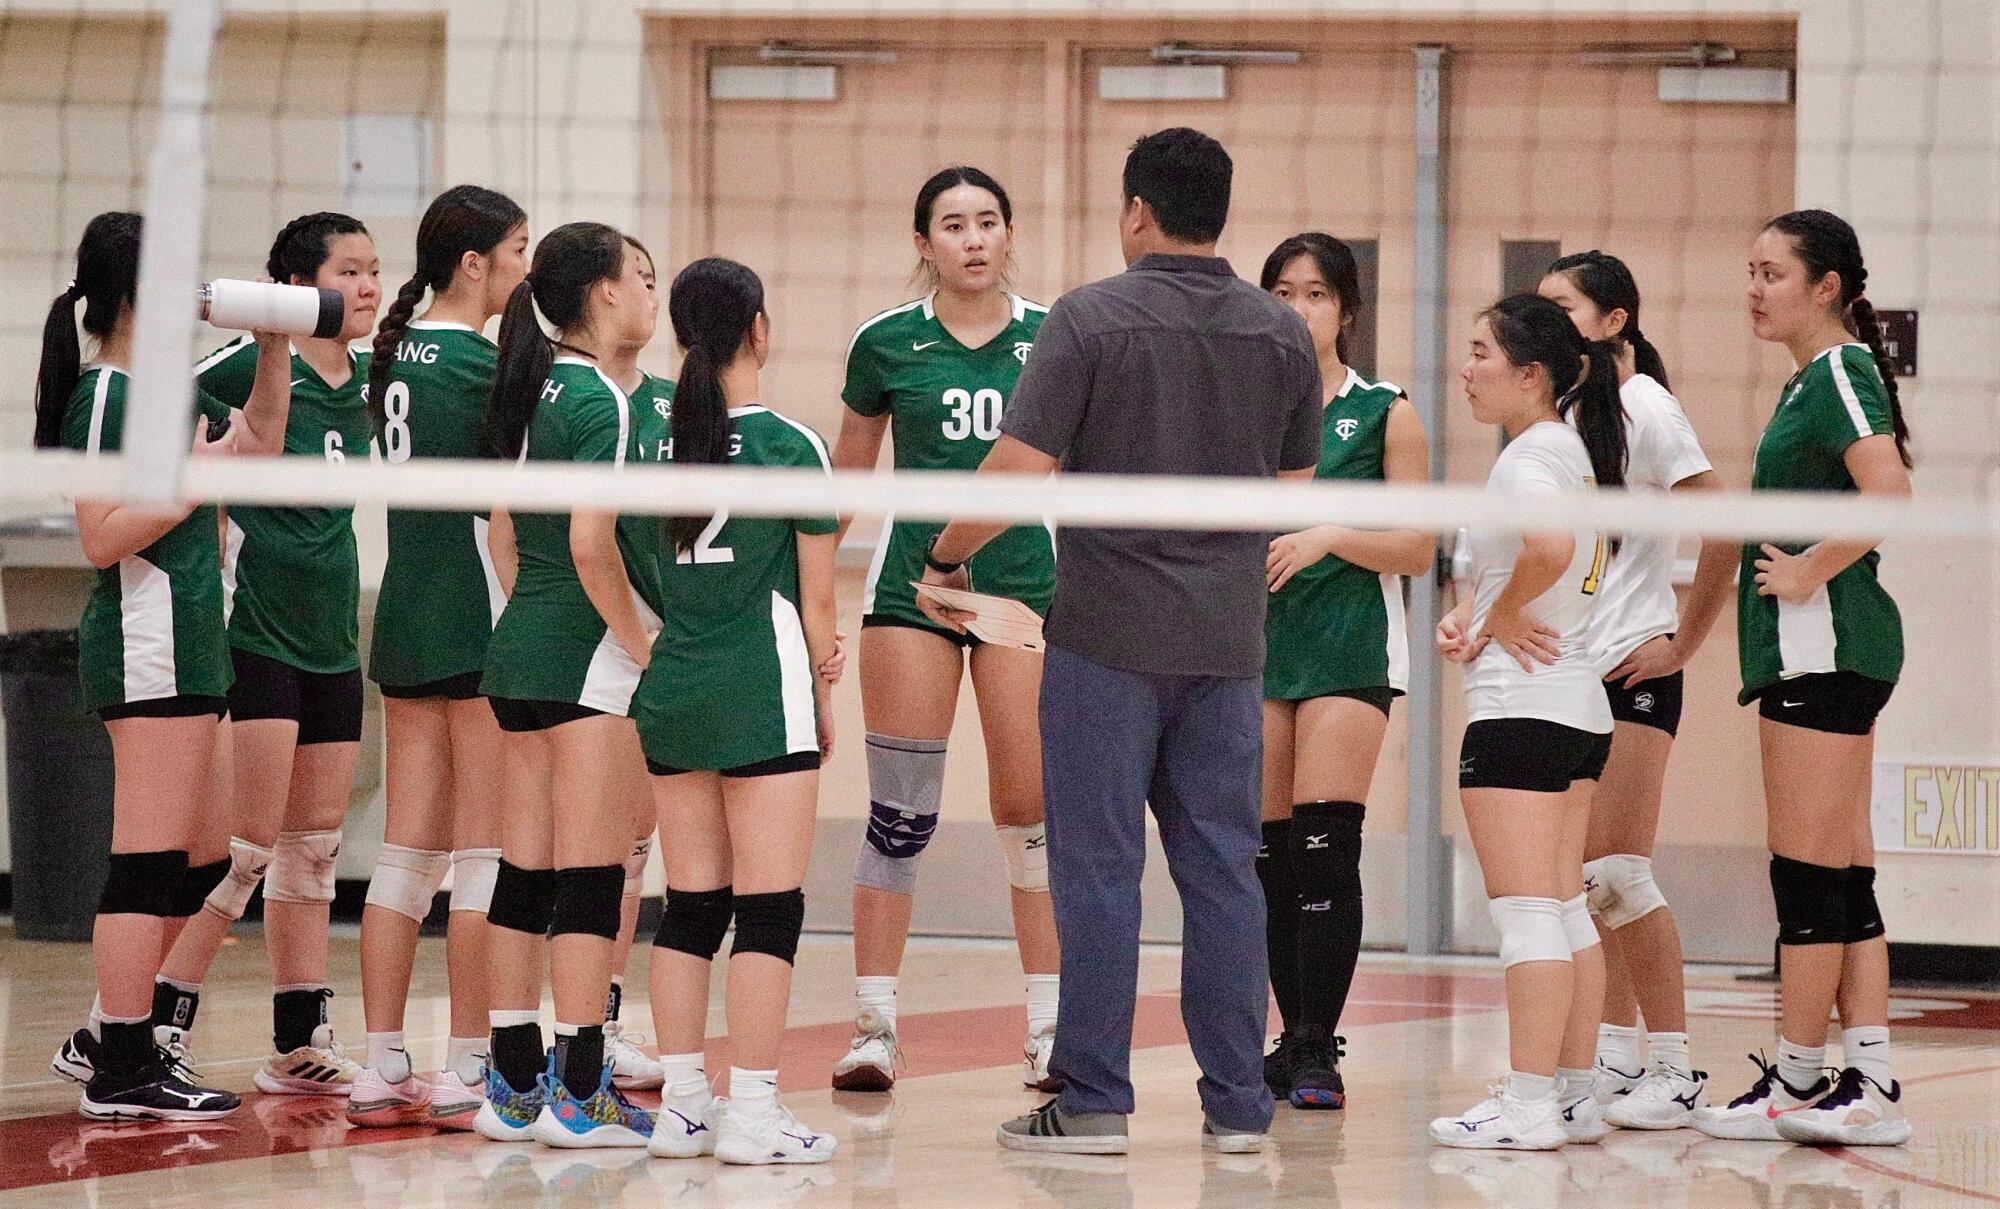 Taylor Yu (30) listens as her dad, Temple City head coach Nathan Yu, gives the team instructions during a timeout.